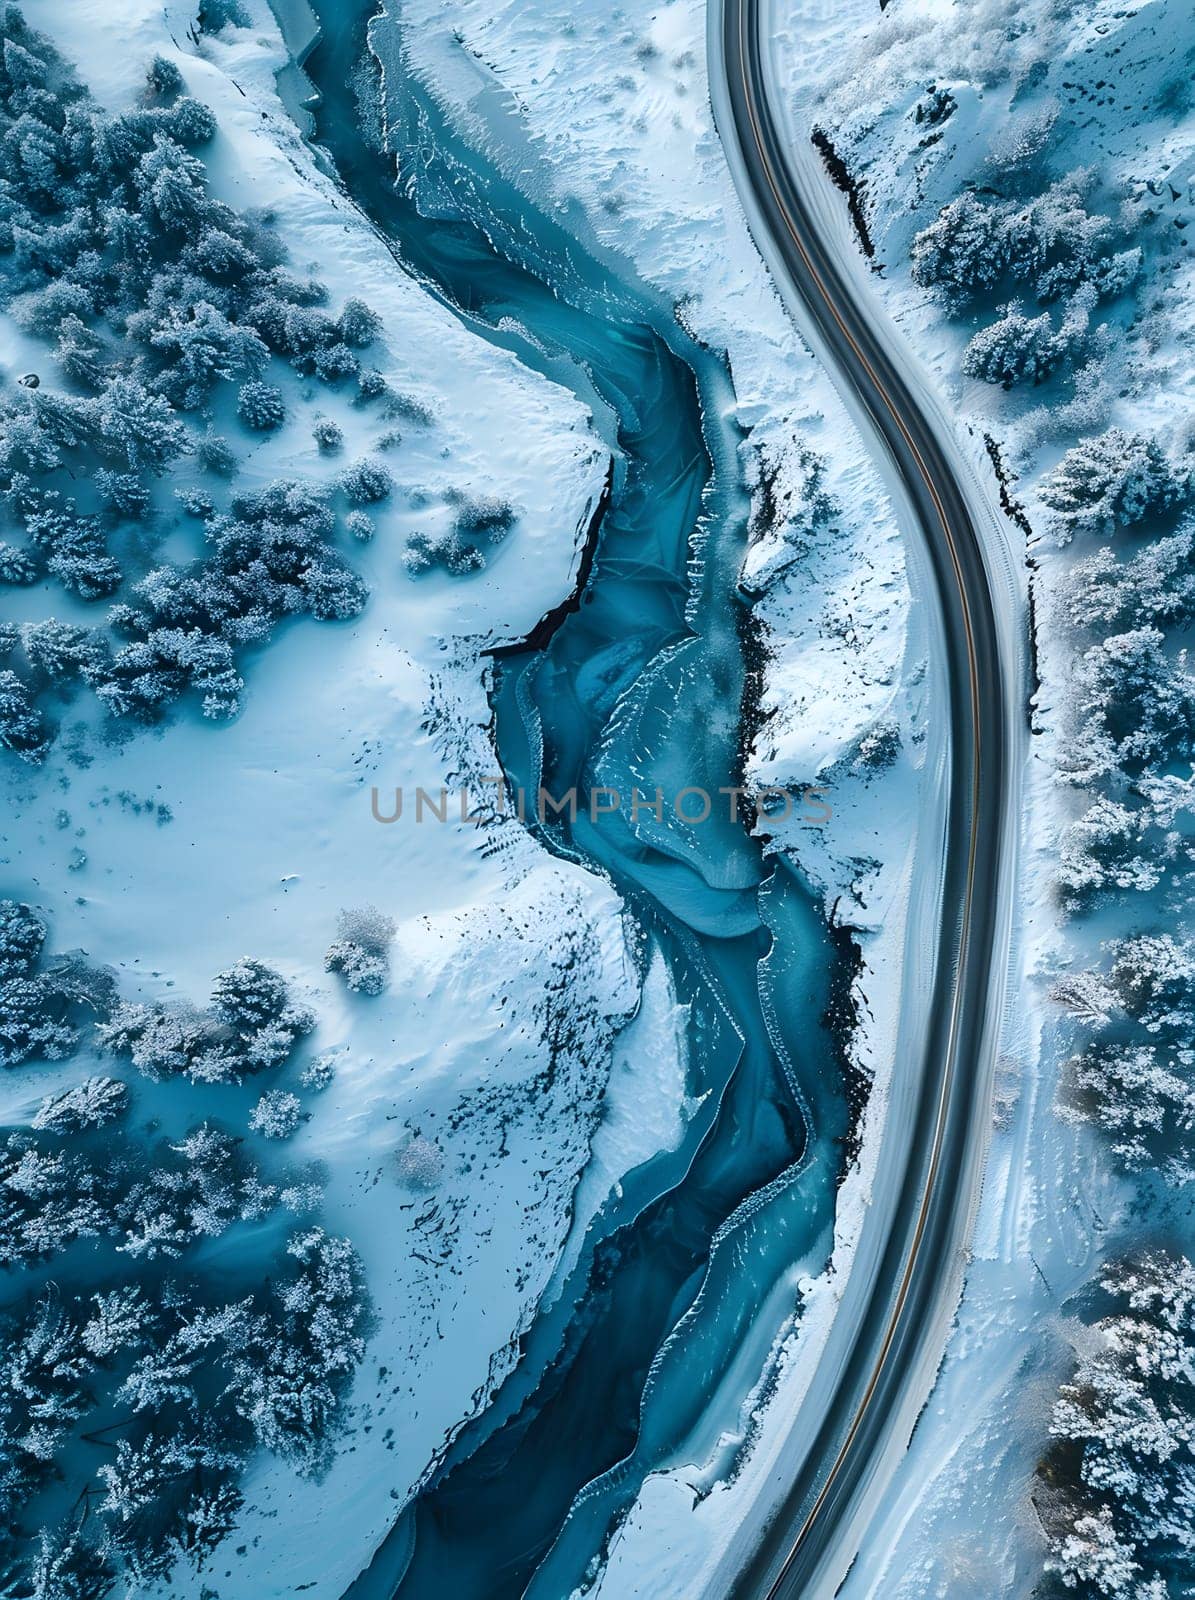 A winding road cuts through a snowy landscape, resembling a frozen watercourse with patterns of snow and ice, creating a picturesque natural scene